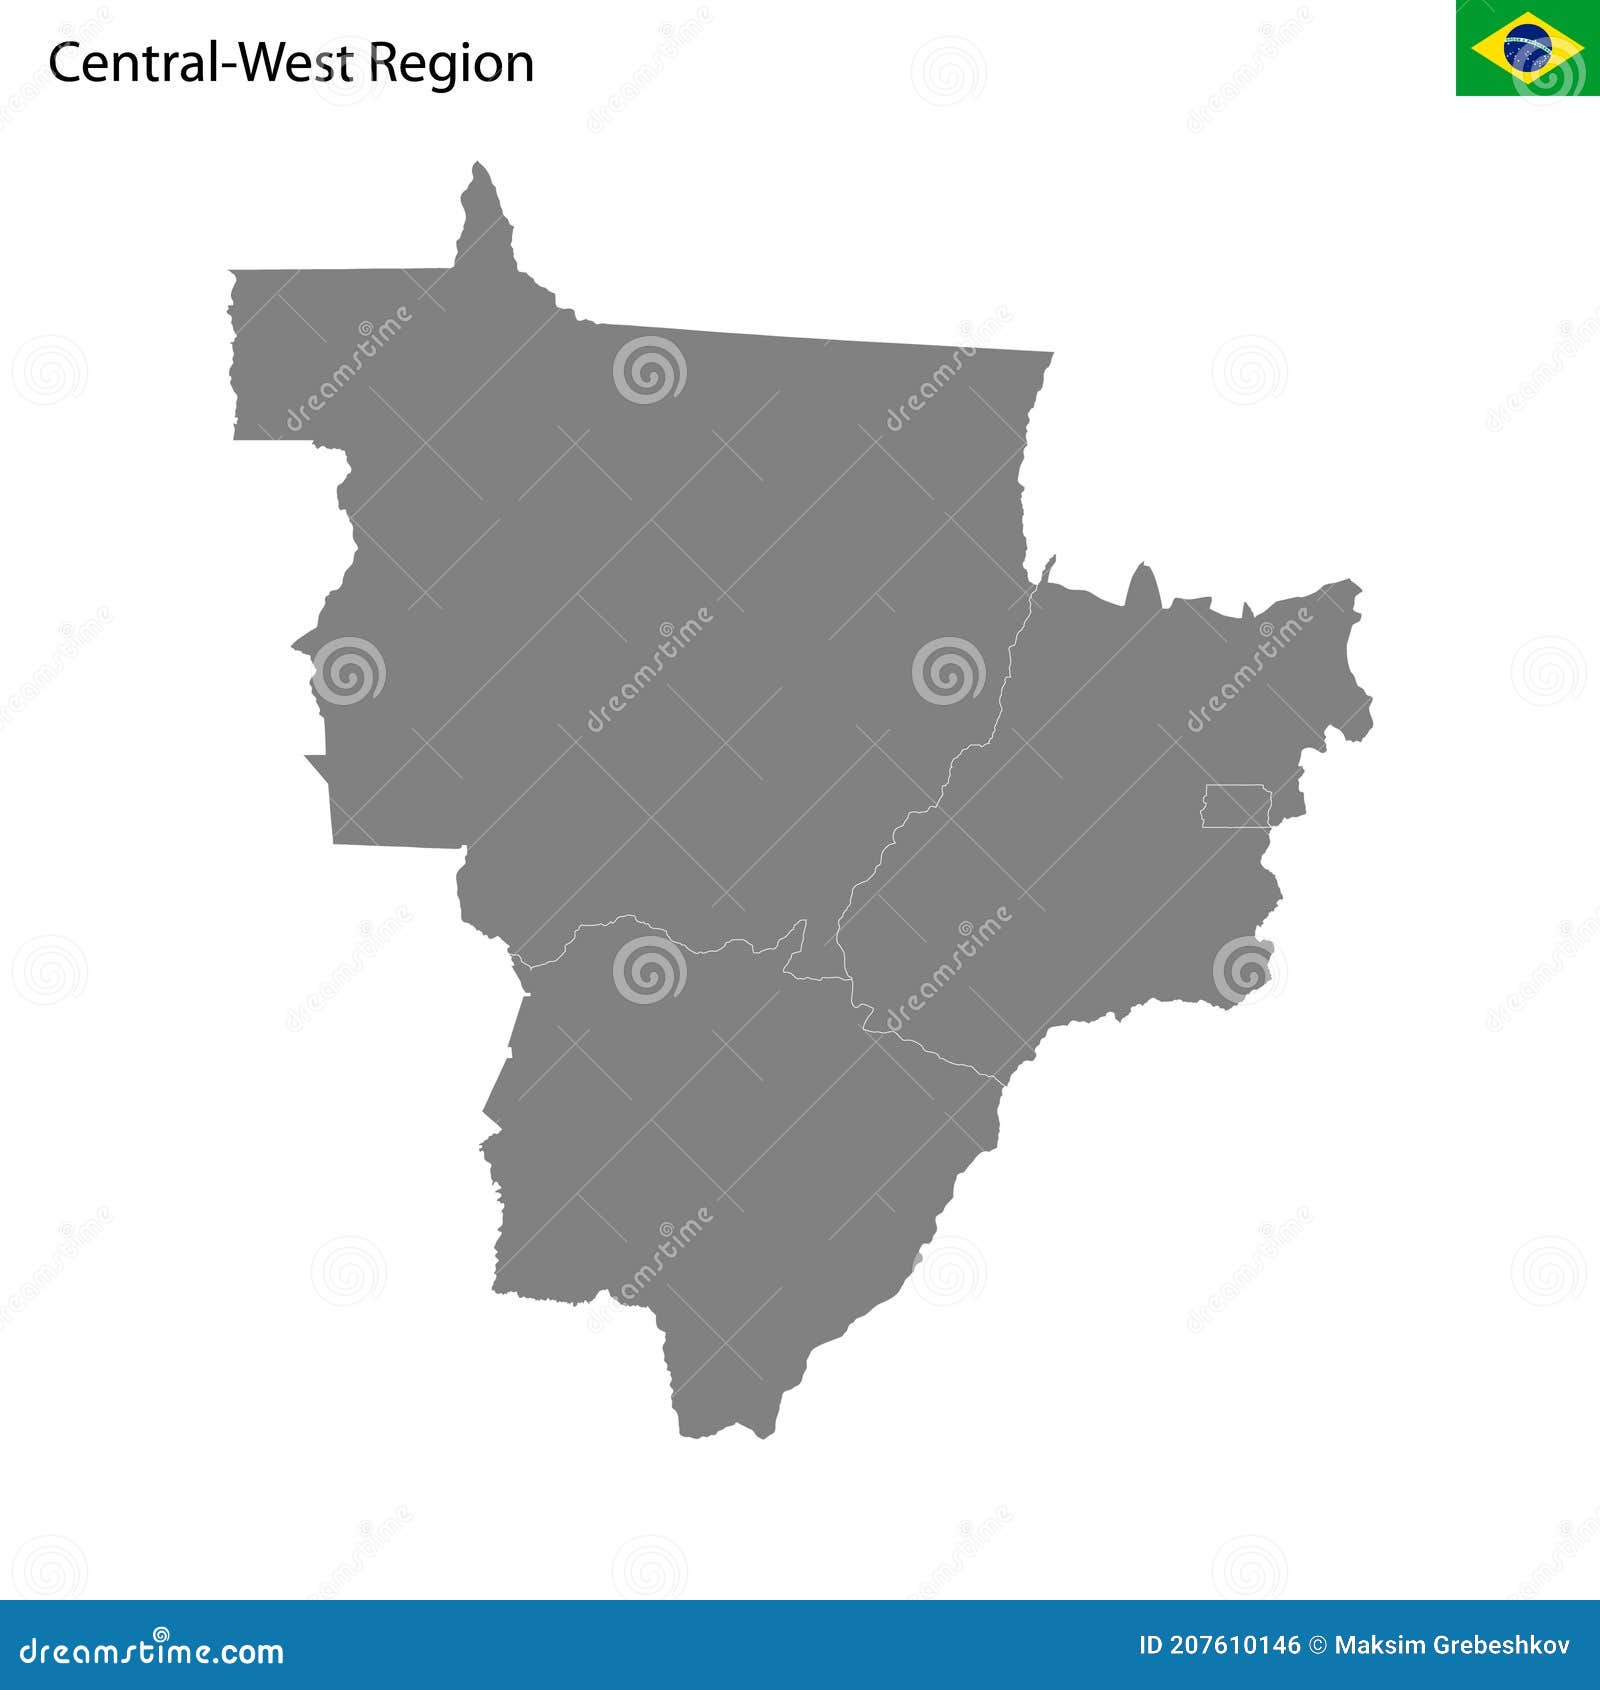 high quality map central-west region of brazil, with borders